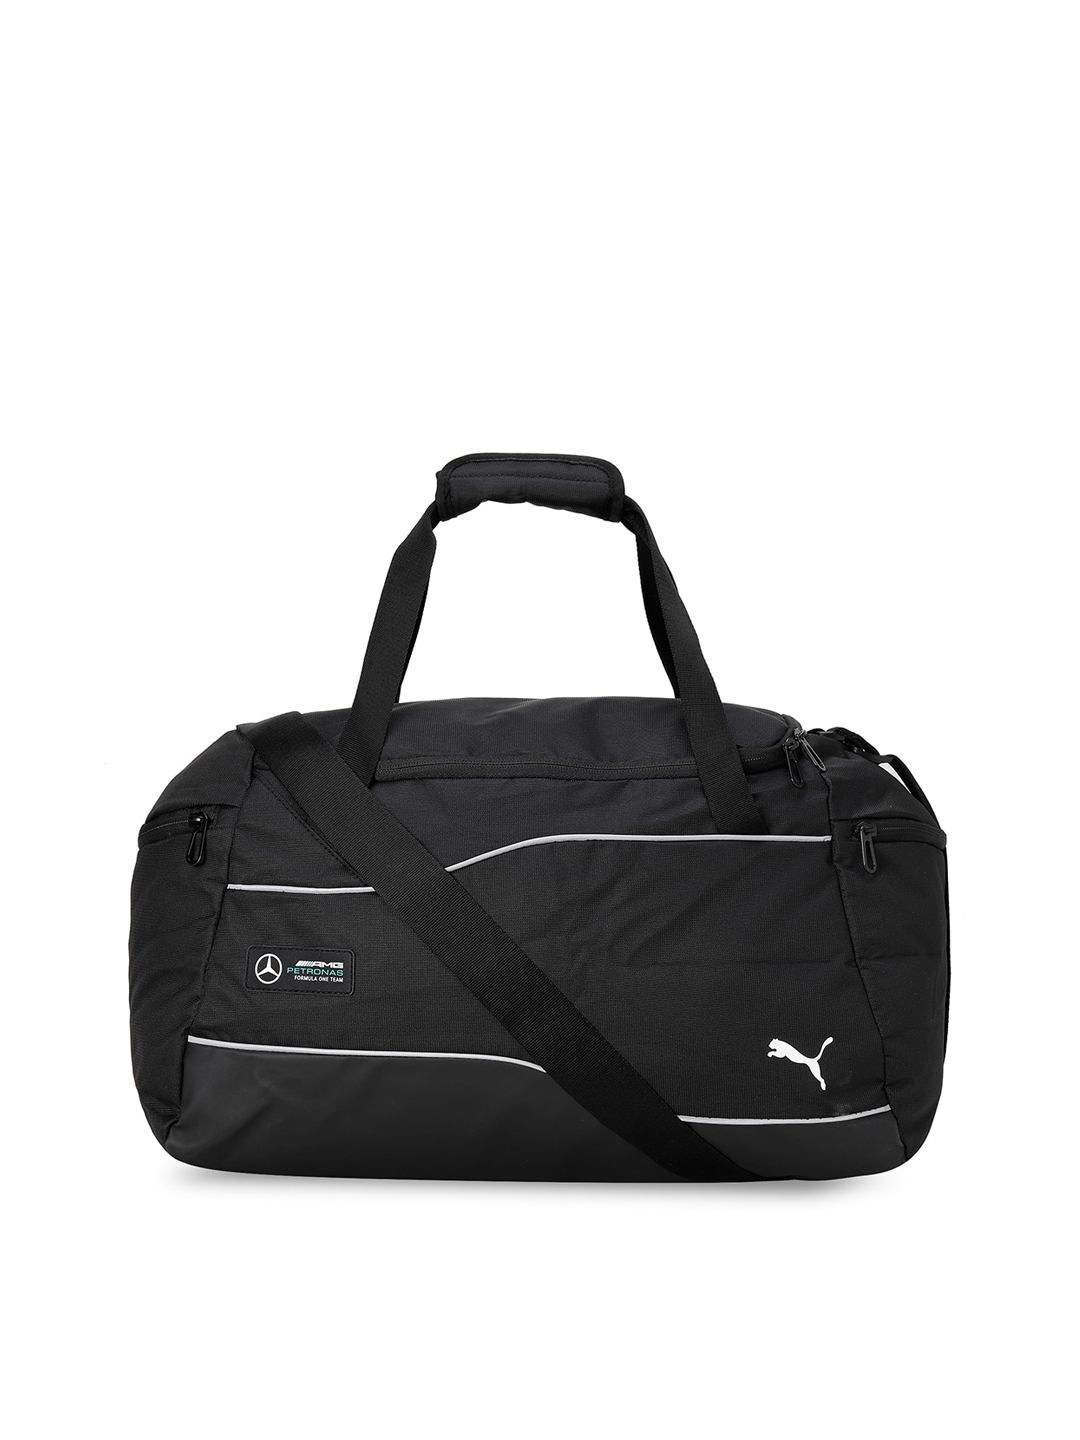 Buy Casual Bags For Men Online At Upto 50% Off From PUMA India